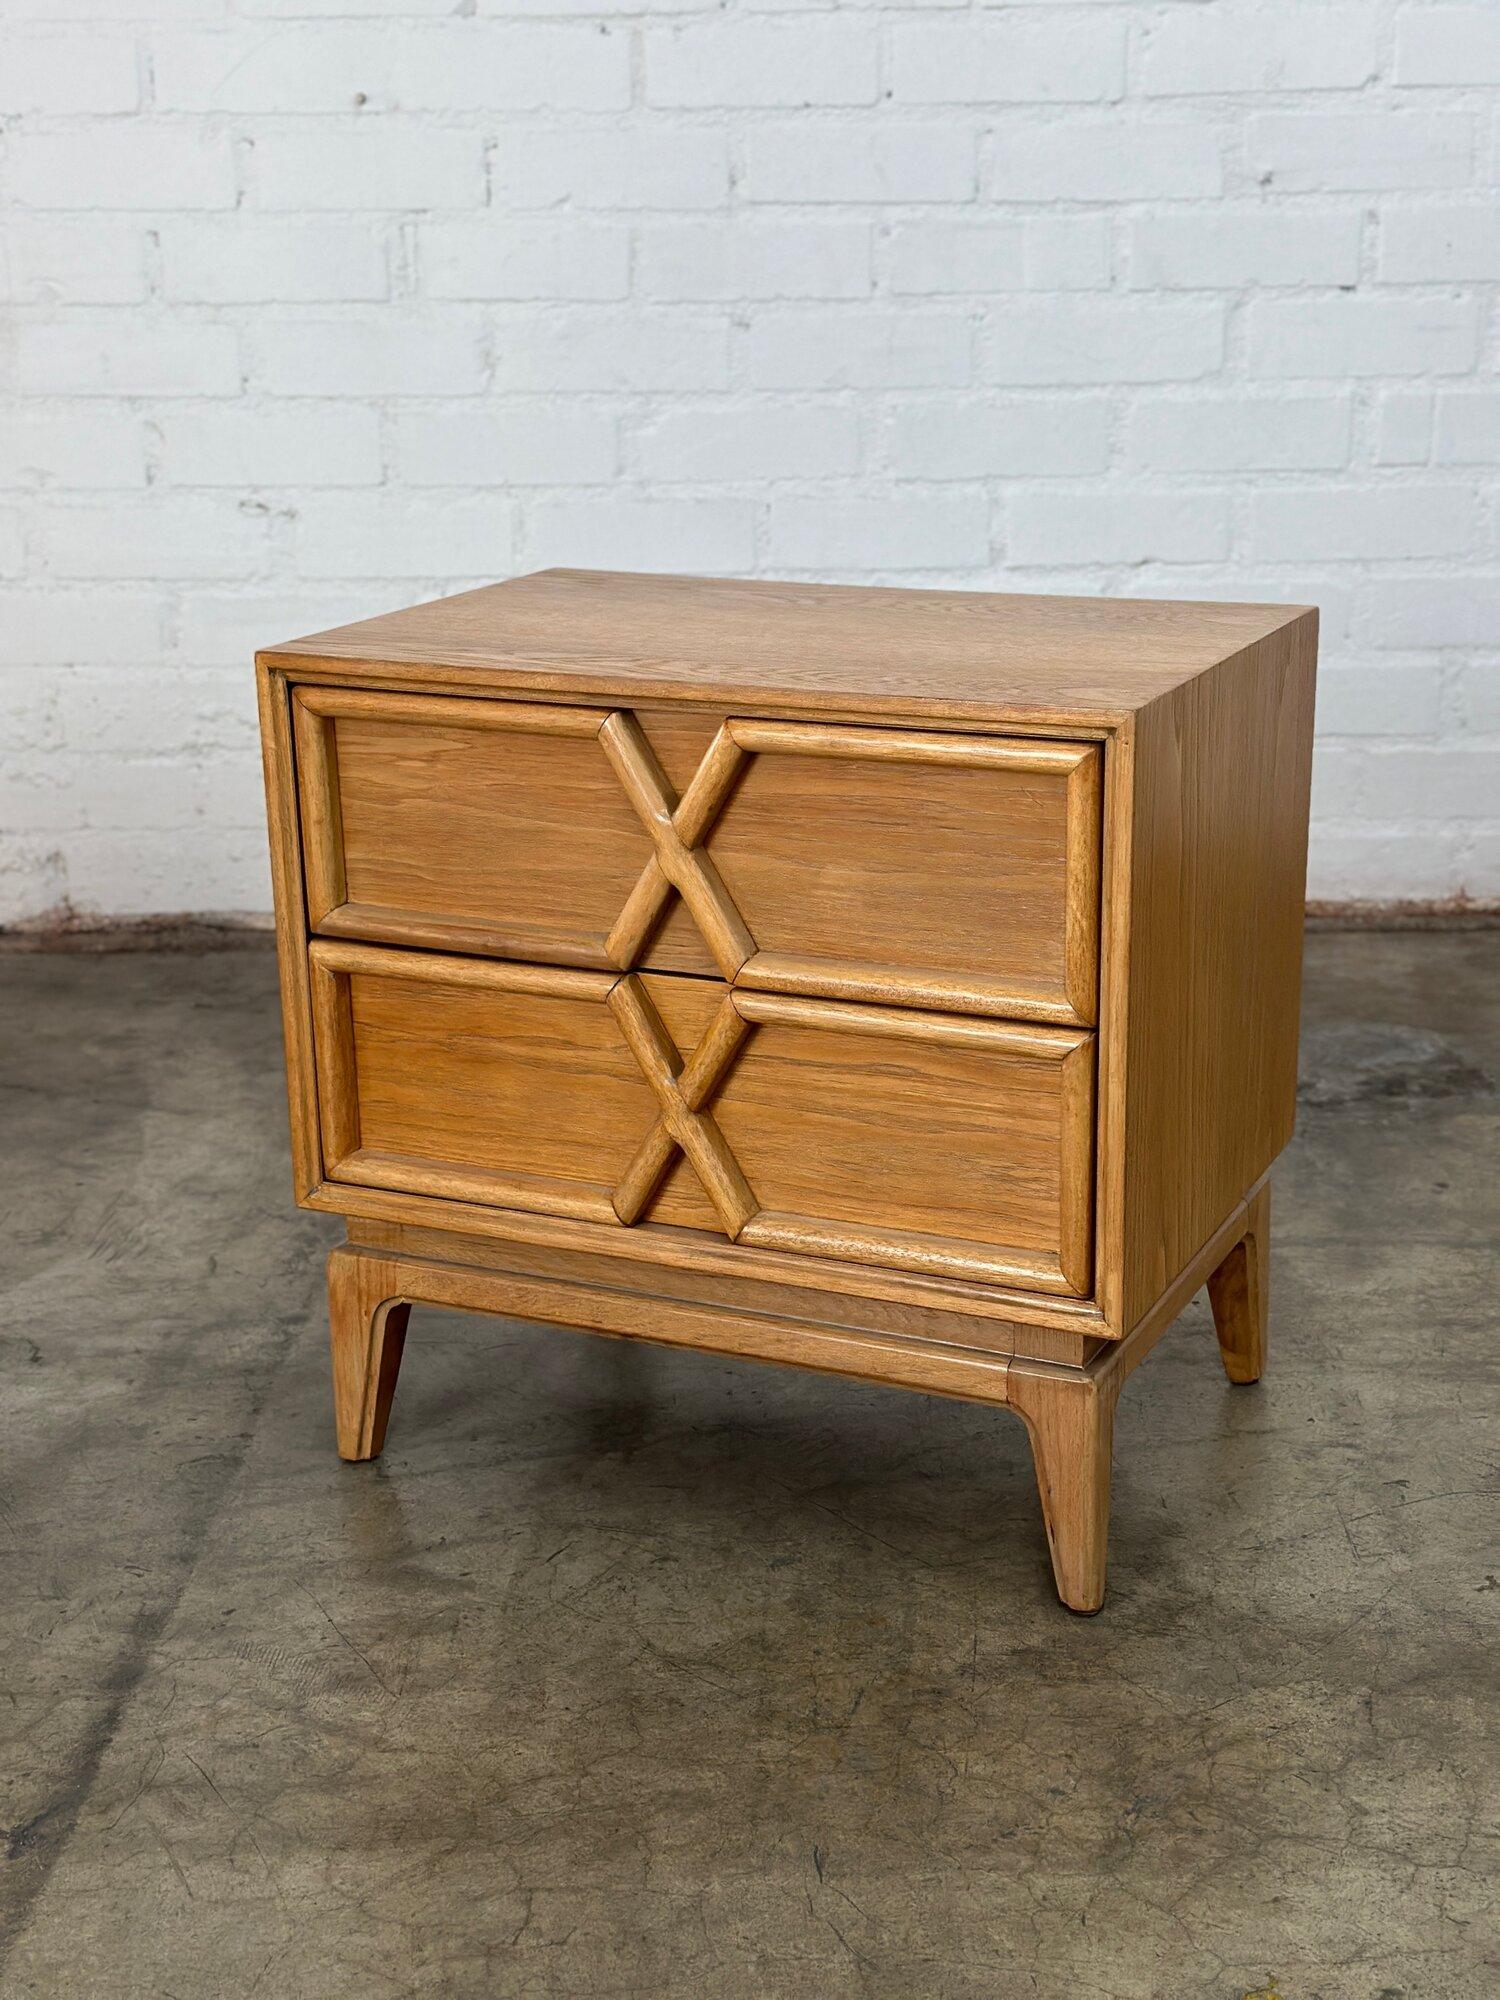 W24 D16 H23.25

1970’s fully refinished nightstands by American of Martinsville. Each nightstand features two drawers with an X design on the face. 

Price is for the pair*